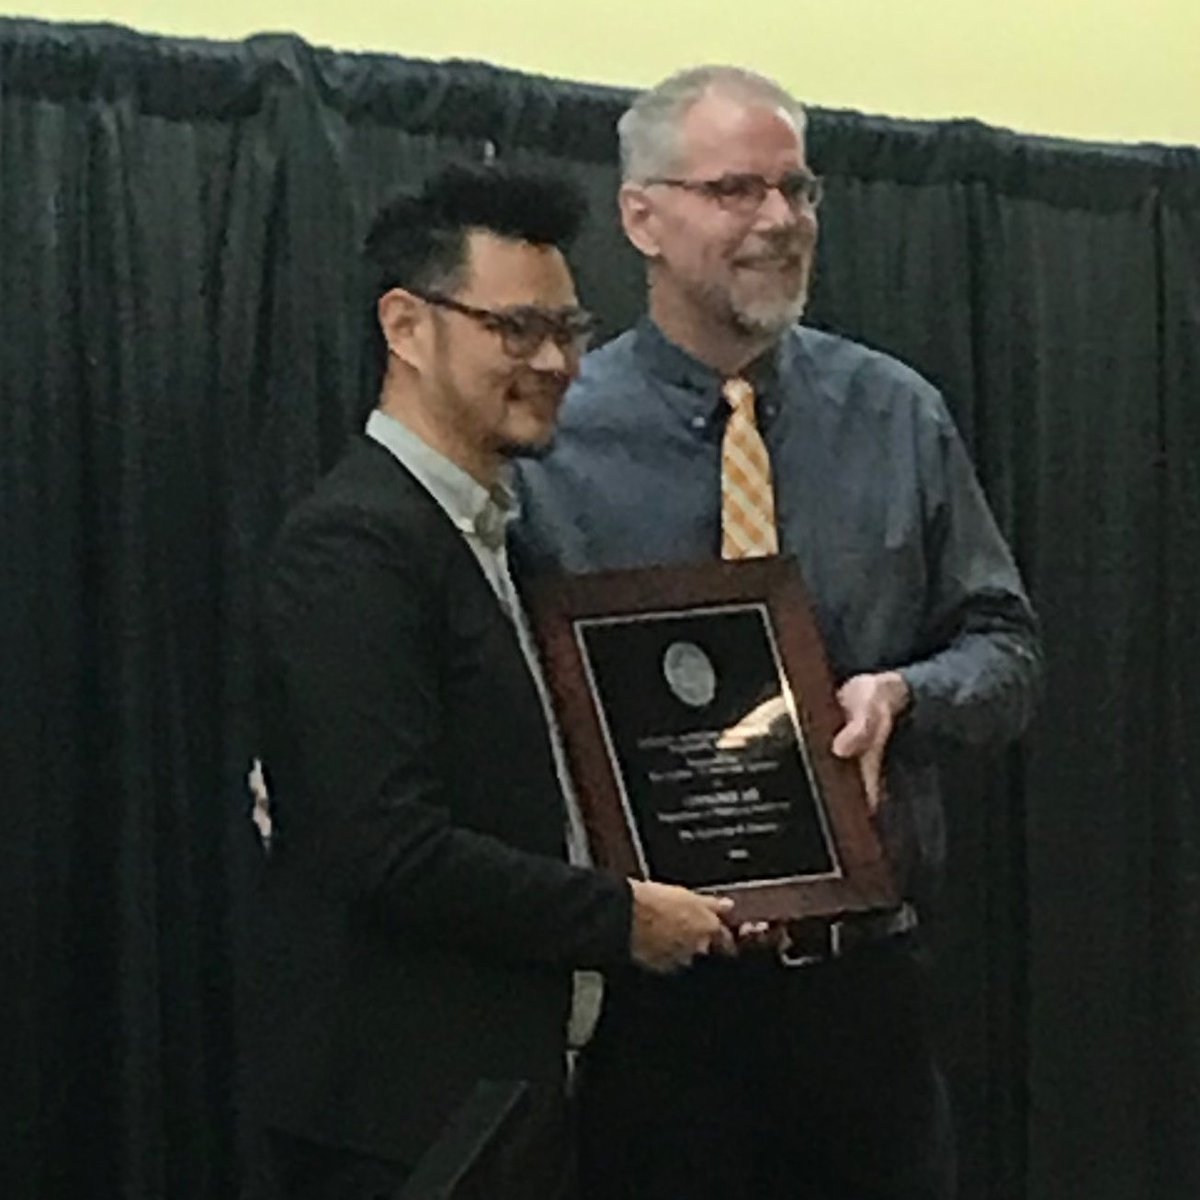 Last night two amazing @UTKPhysAstro faculty members were feted at the 2022 @ArtsSciencesUT Award Ceremony. Prof. Hanno Weitering for Distinguished Research and Prof. @larrylee for Faculty Outreach Teaching. Congrats for these well deserved honors!